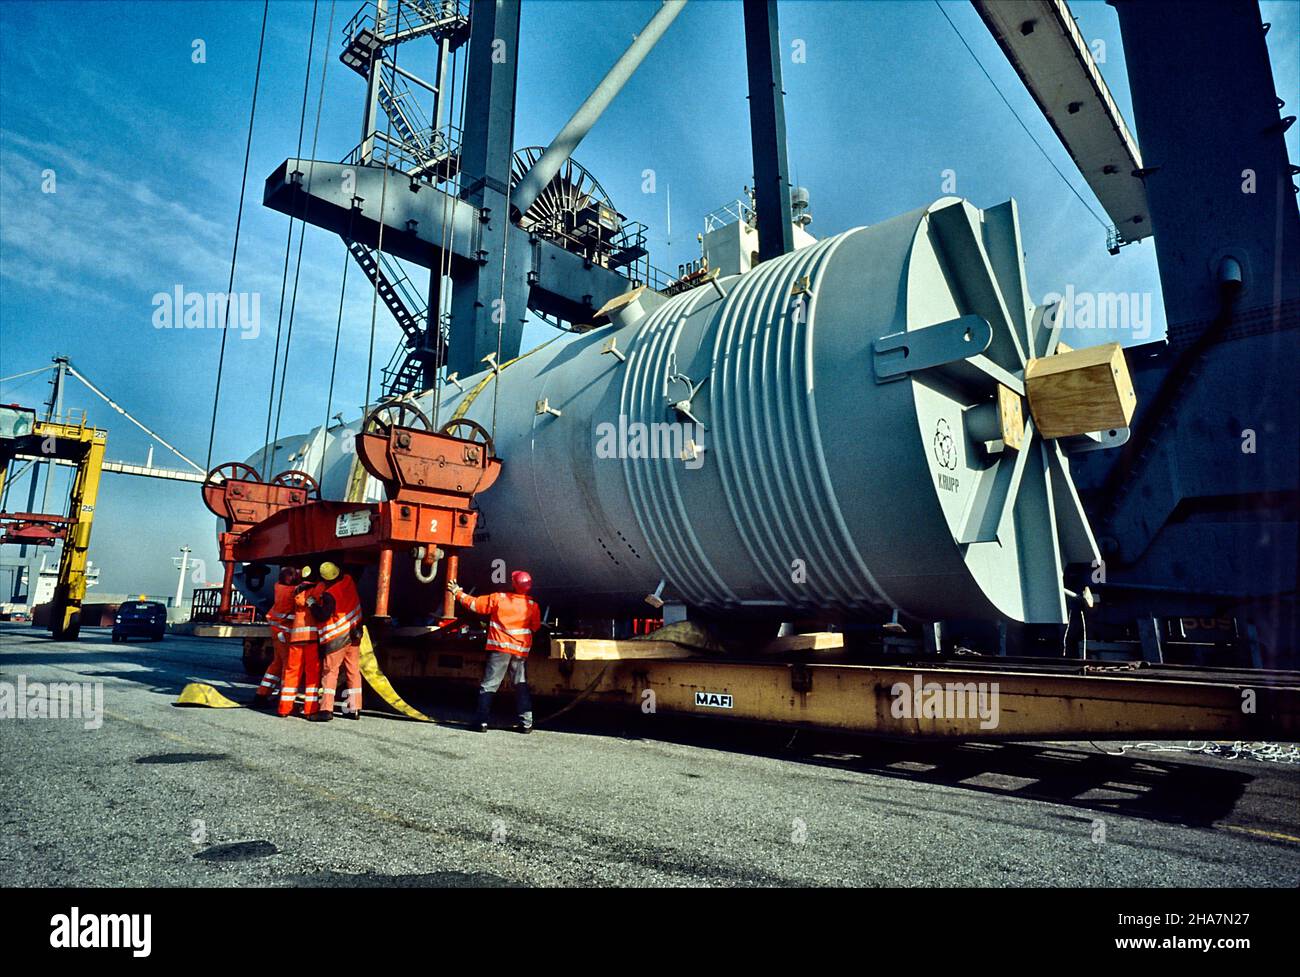 Heavy Plant Component, Boiler Tube, being lifted aboard a Container Vessel at Eurogate Container Terminal in the Port of Hamburg, Germany. Stock Photo